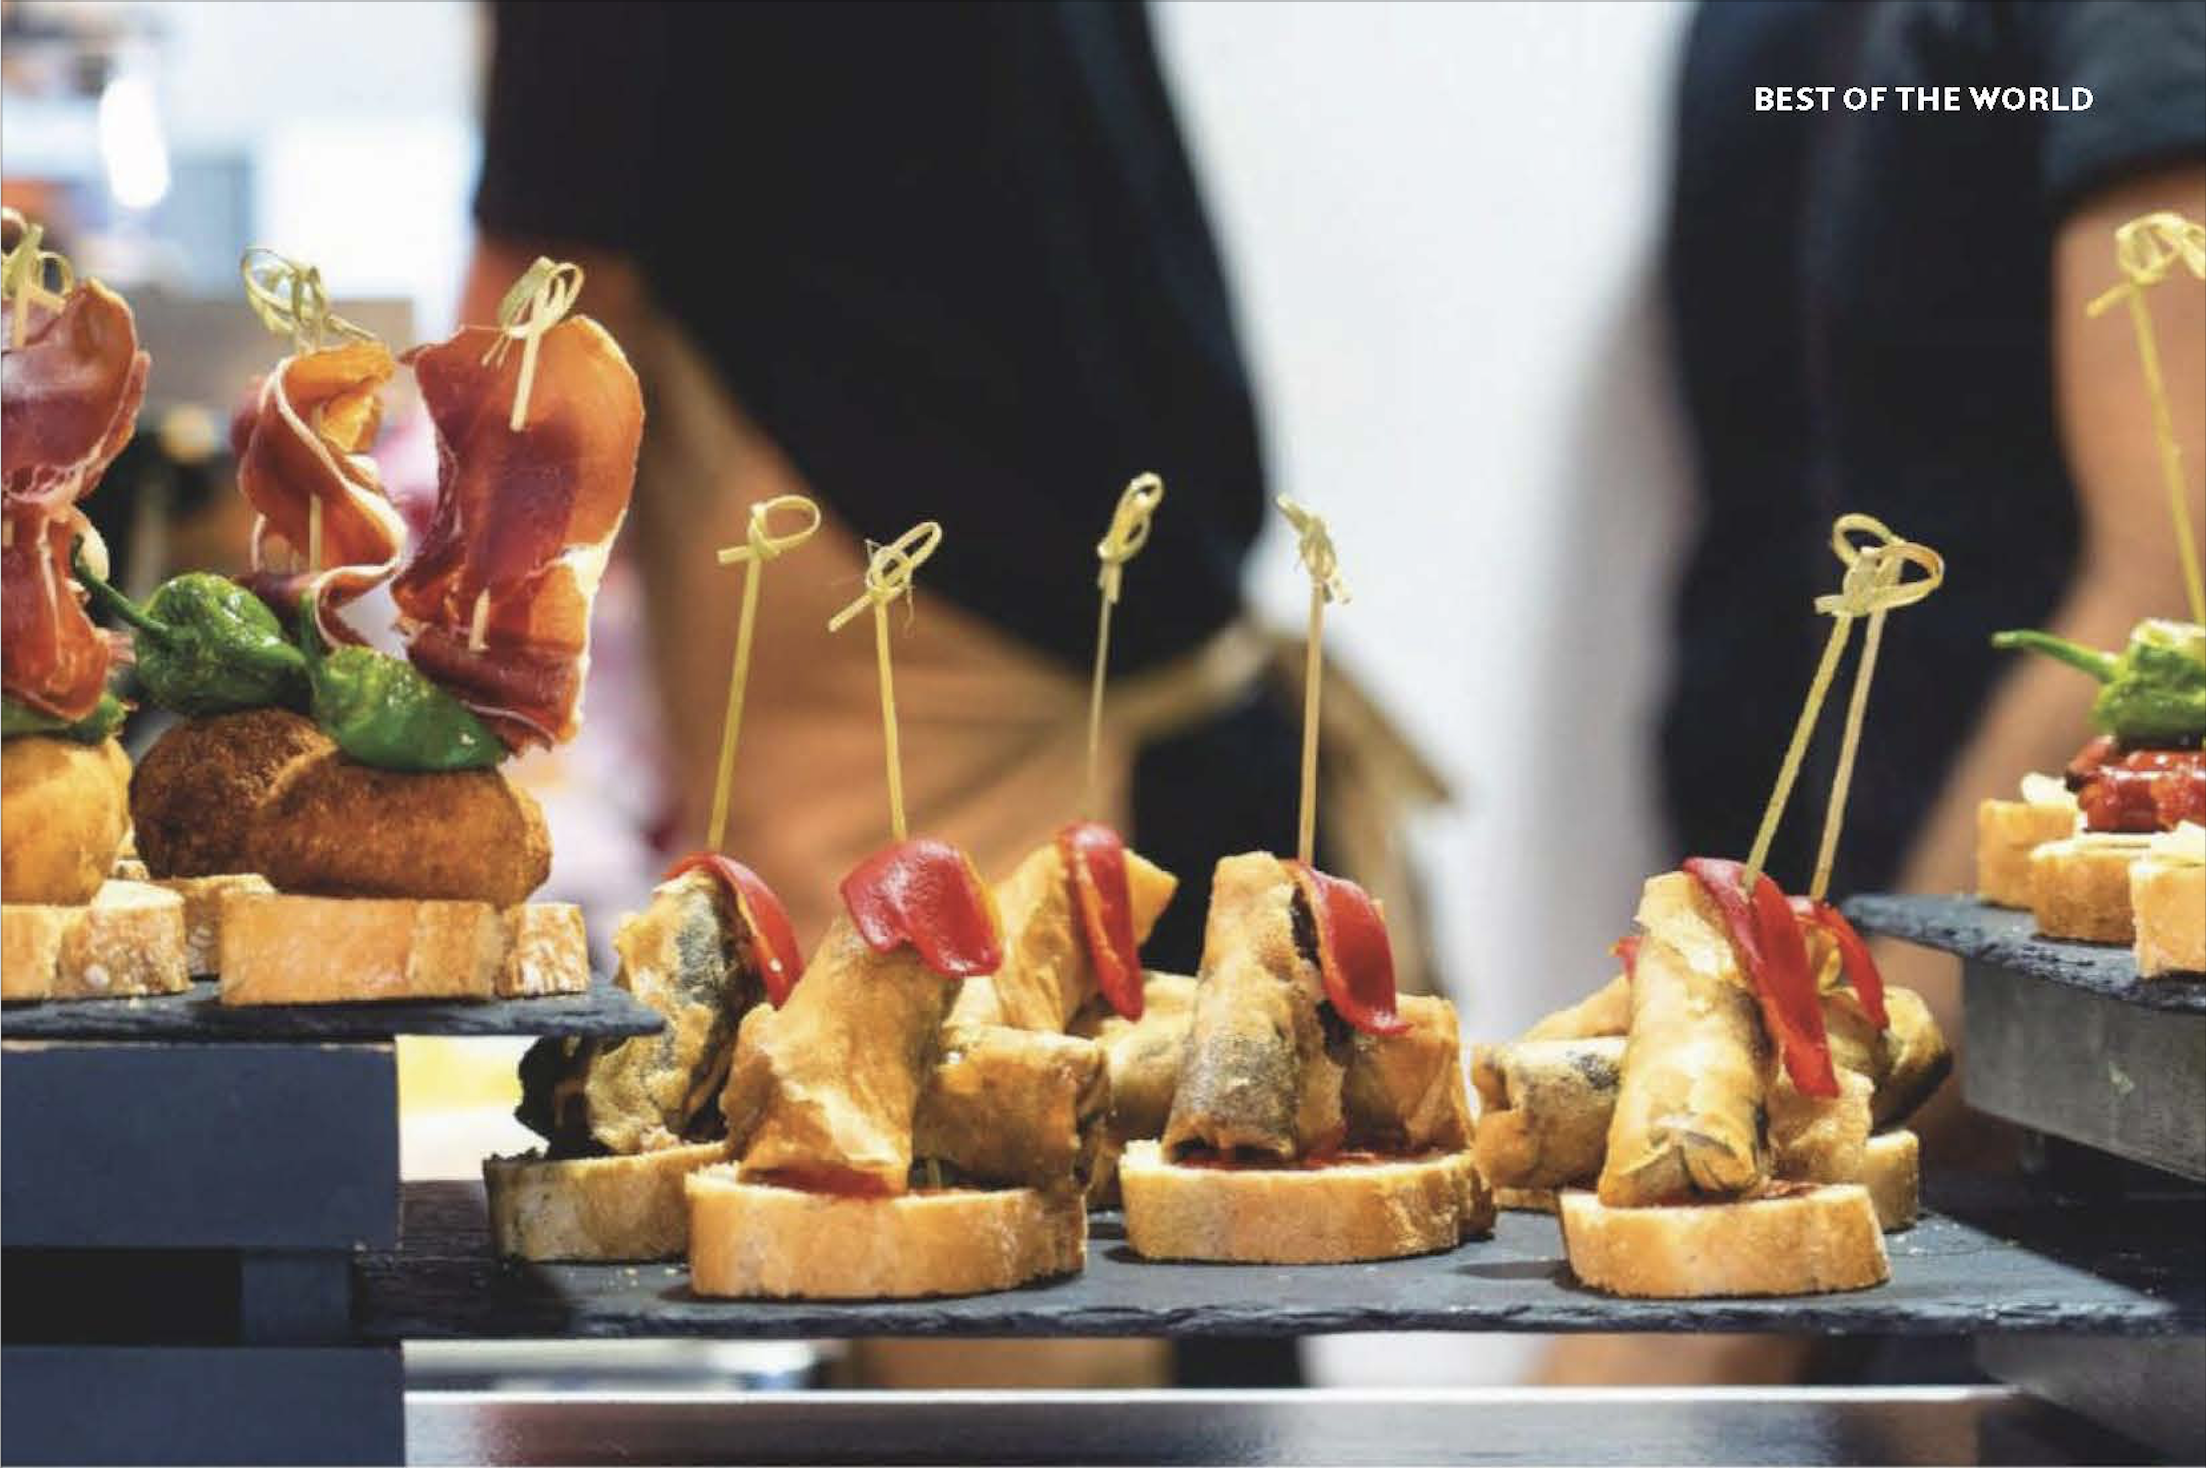 Pinchos-National-Geographic